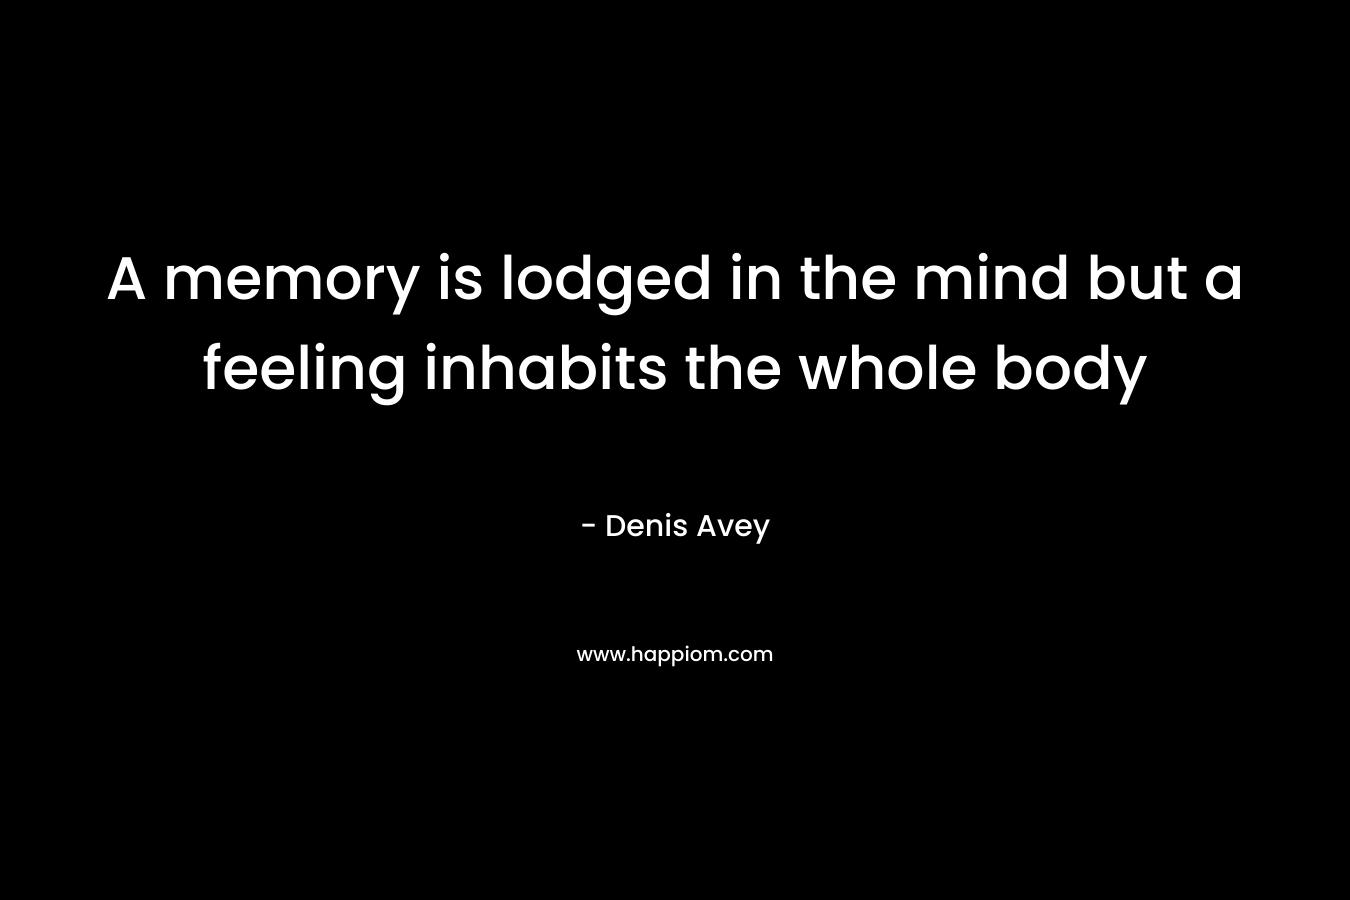 A memory is lodged in the mind but a feeling inhabits the whole body